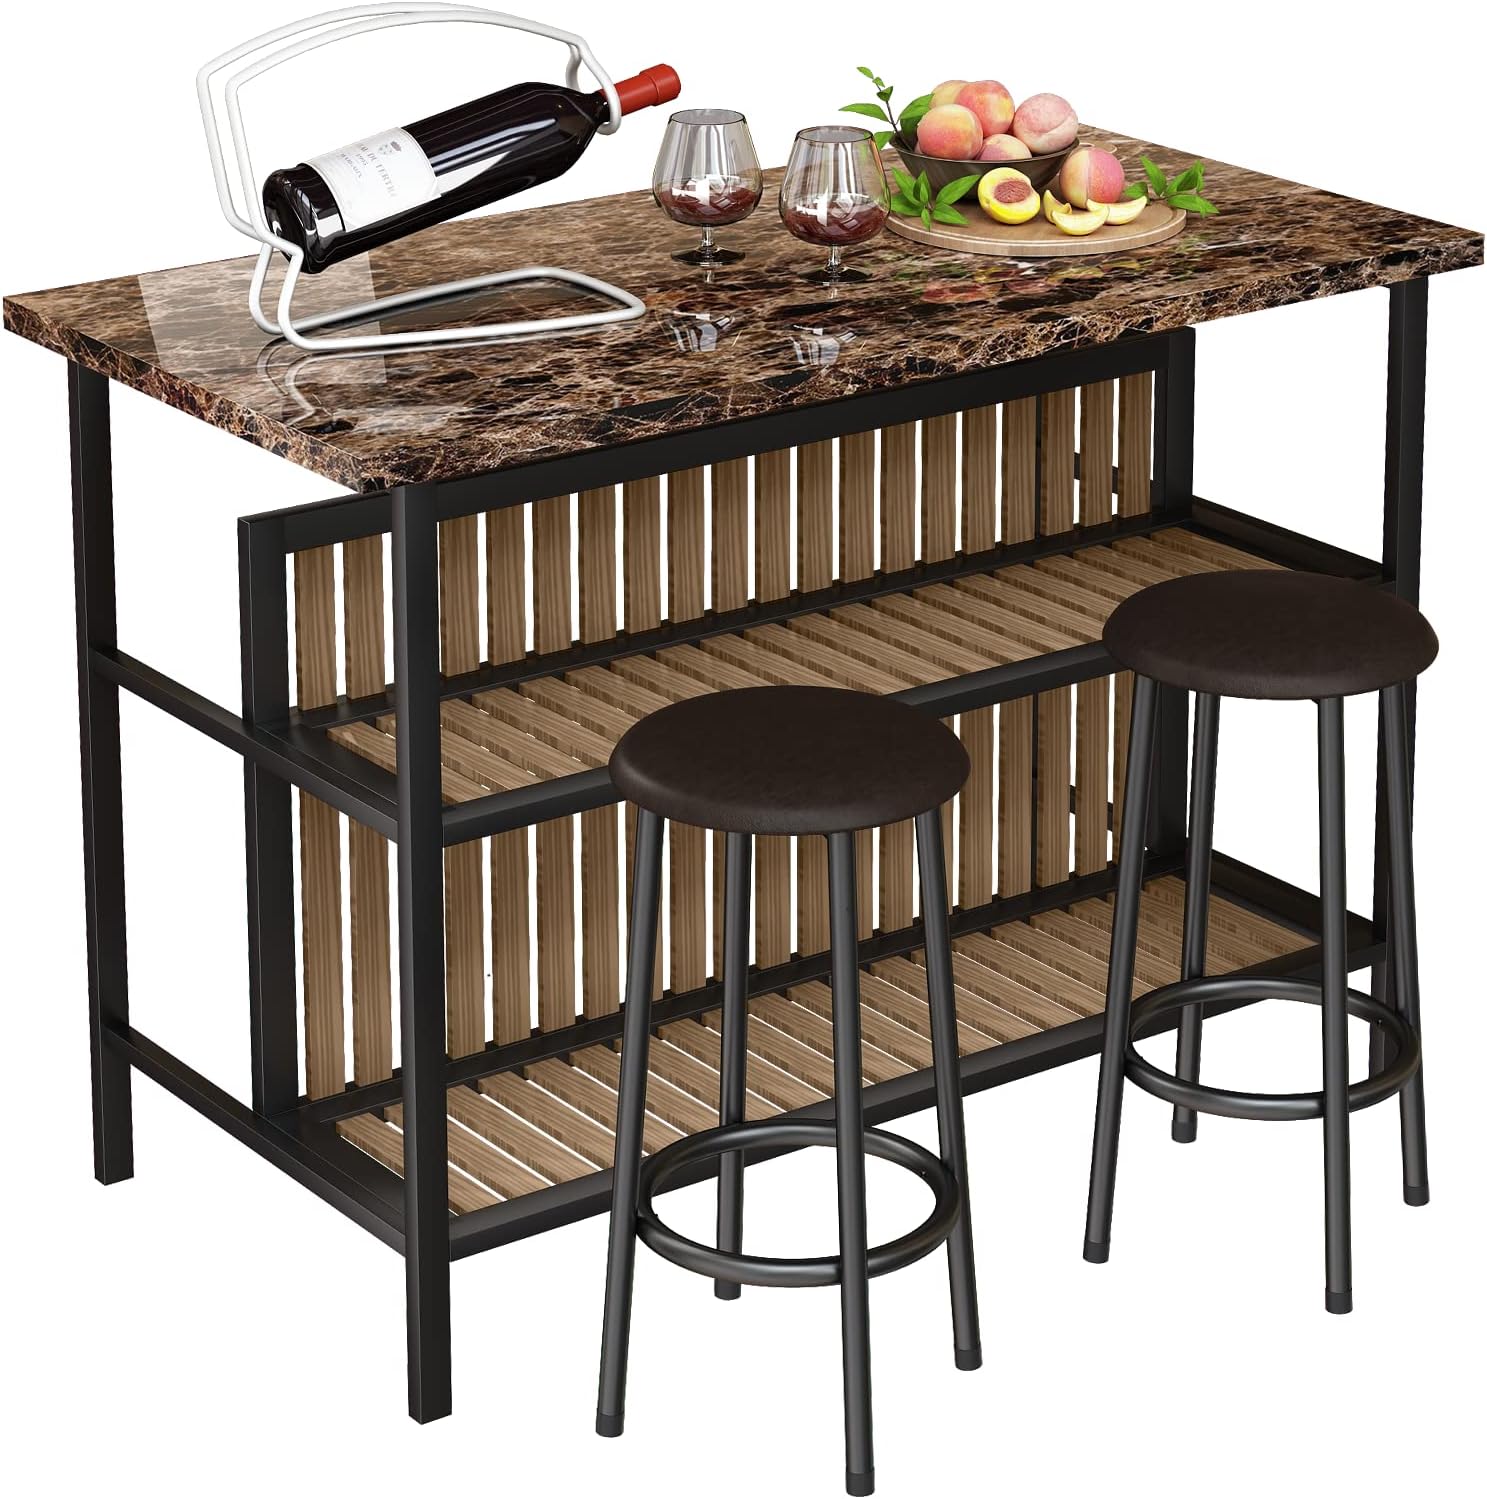 AWQM 3 Piece Bar Table Set with Storage, Kitchen Island with Seating Wooden Counter Height Table and Chairs Set, Brown